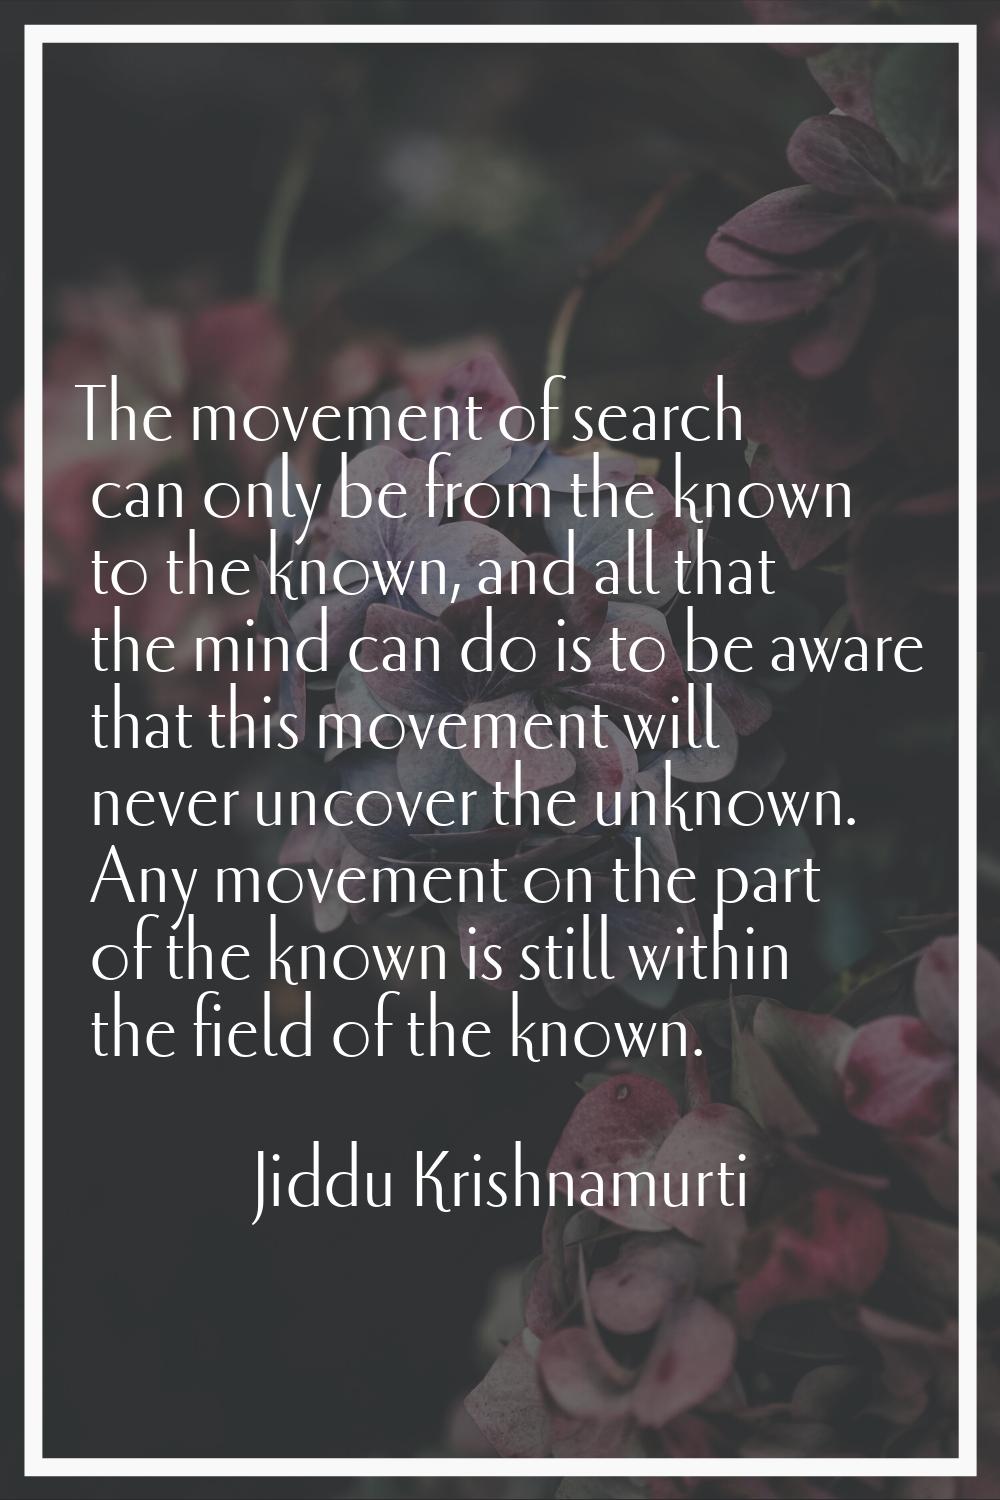 The movement of search can only be from the known to the known, and all that the mind can do is to 